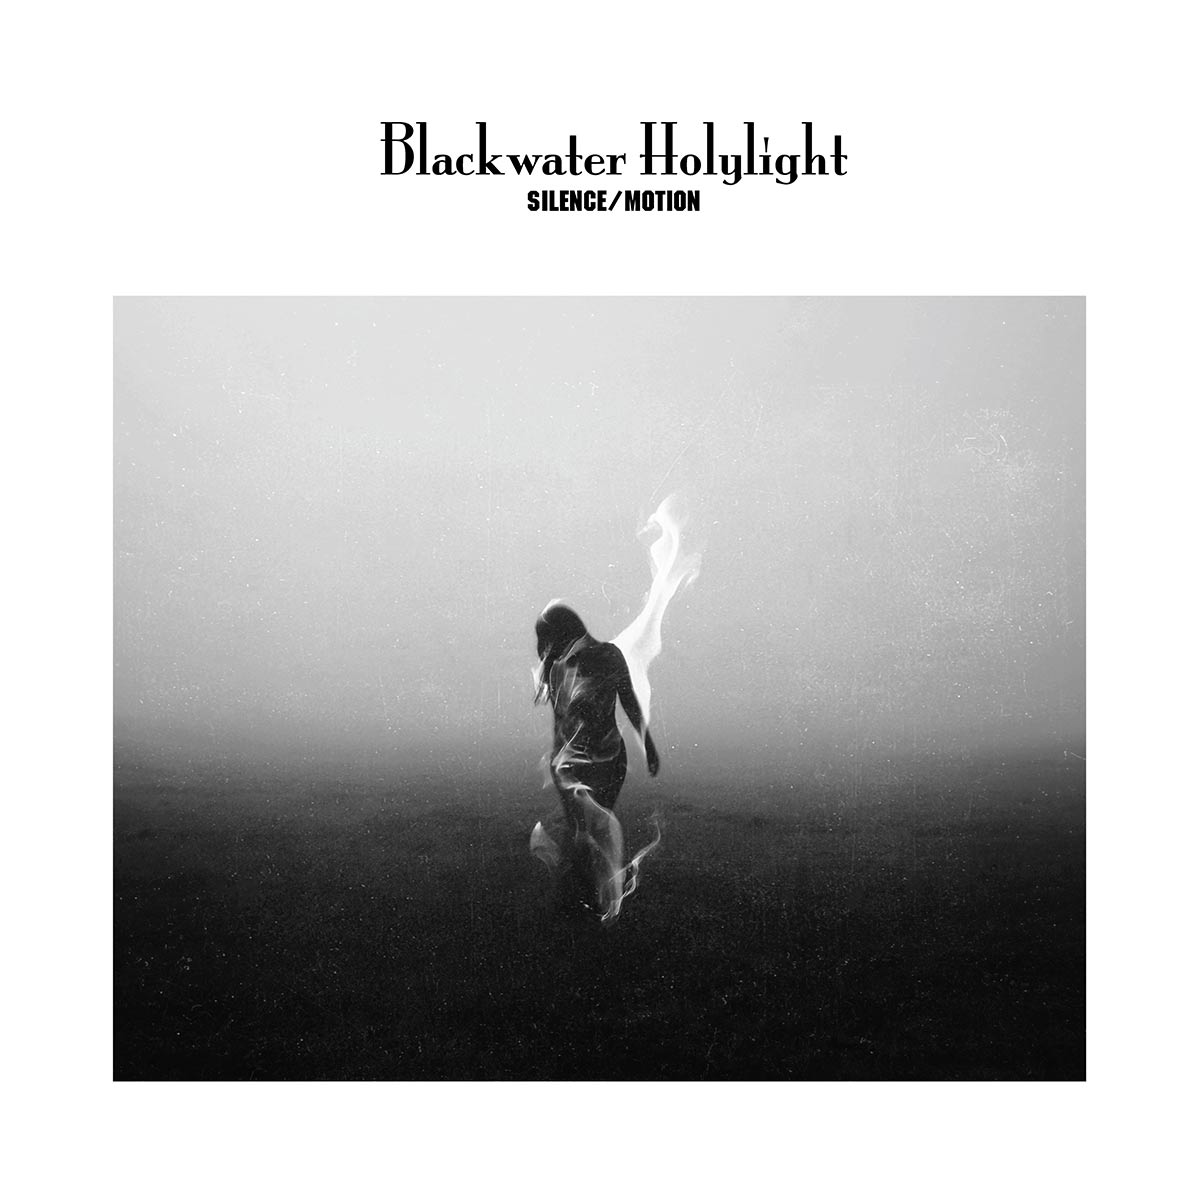 Arcade Sound - Blackwater Holylight - Silence/Motion - Turq. Blue LP front cover